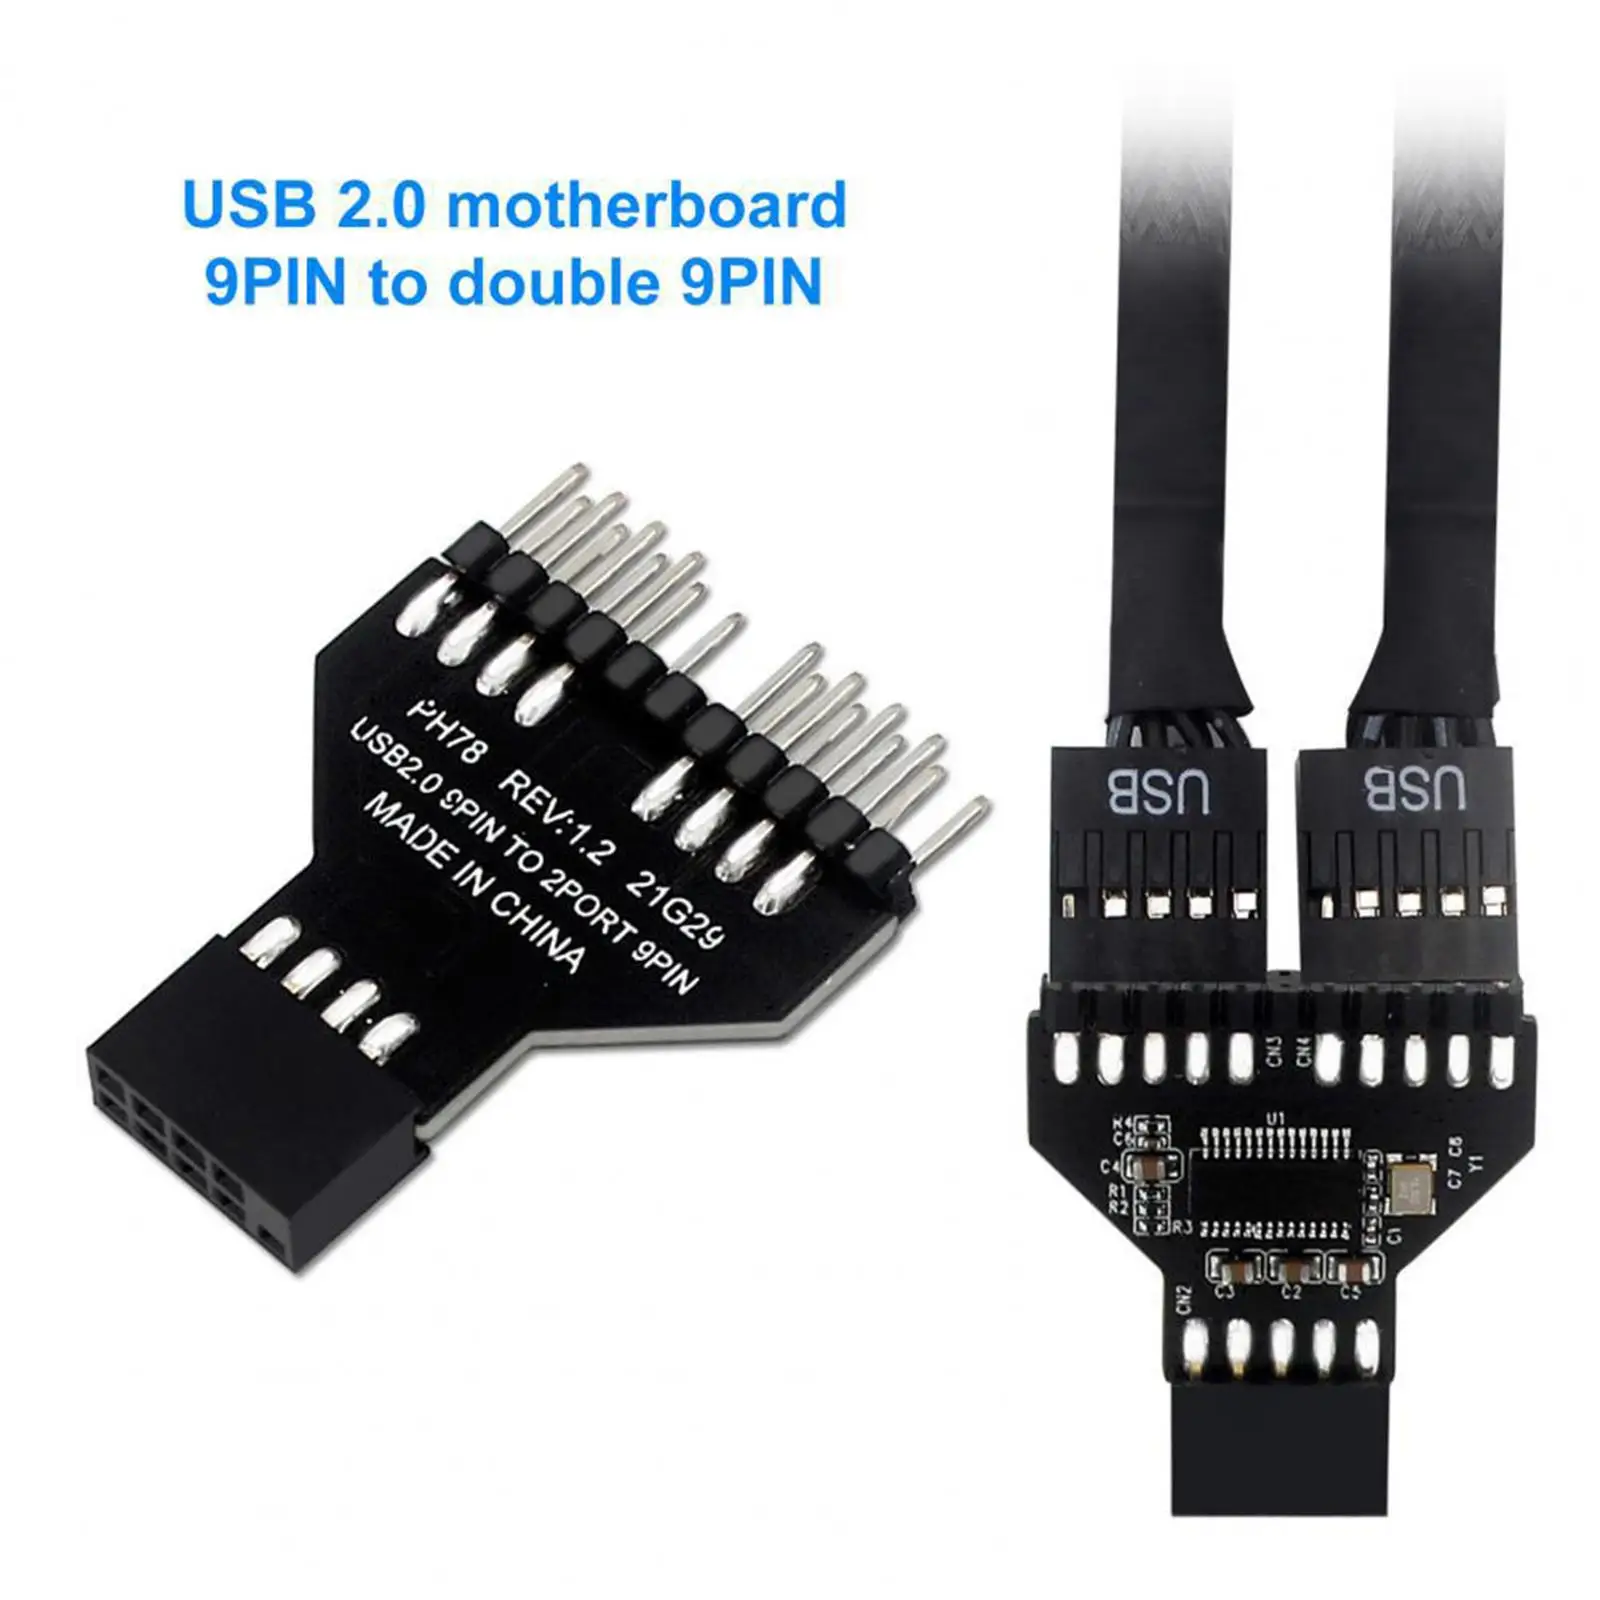 USB2.0 Motherboard 9Pin to Dual 9Pin Male Adapter for RGB Lamp Fan 9Pin USB Header Female 1 to 2 Male Extension Splitter